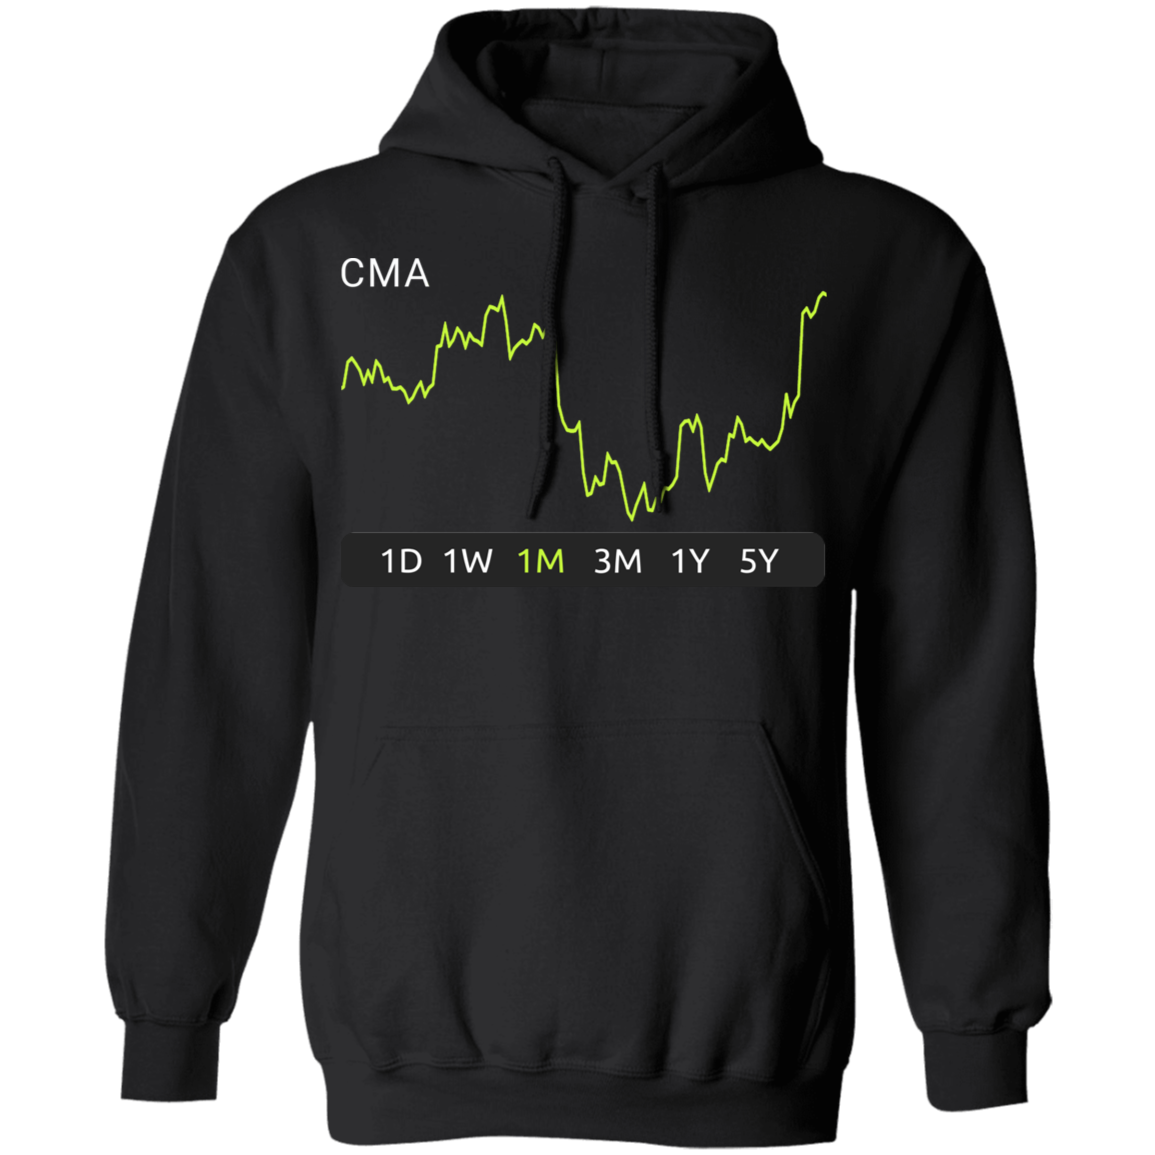 CMA Stock 1m Pullover Hoodie